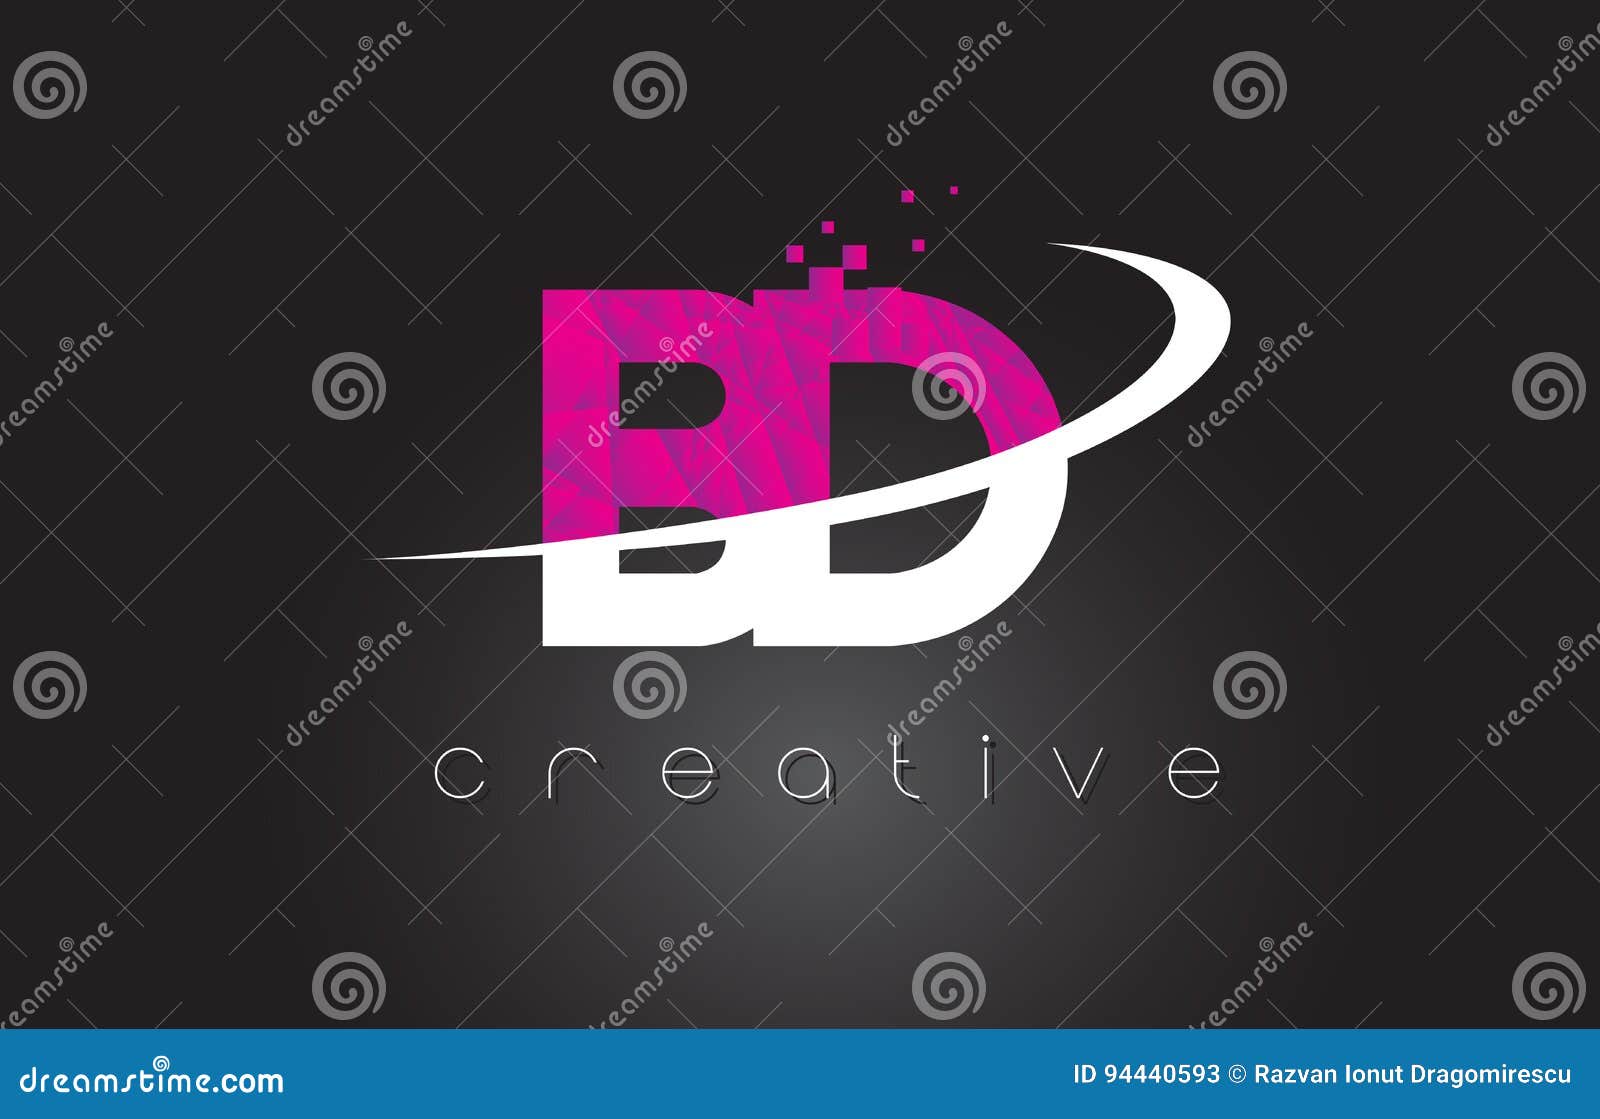 Bd B D Creative Letters Design With White Pink Colors Stock Vector Illustration Of Design